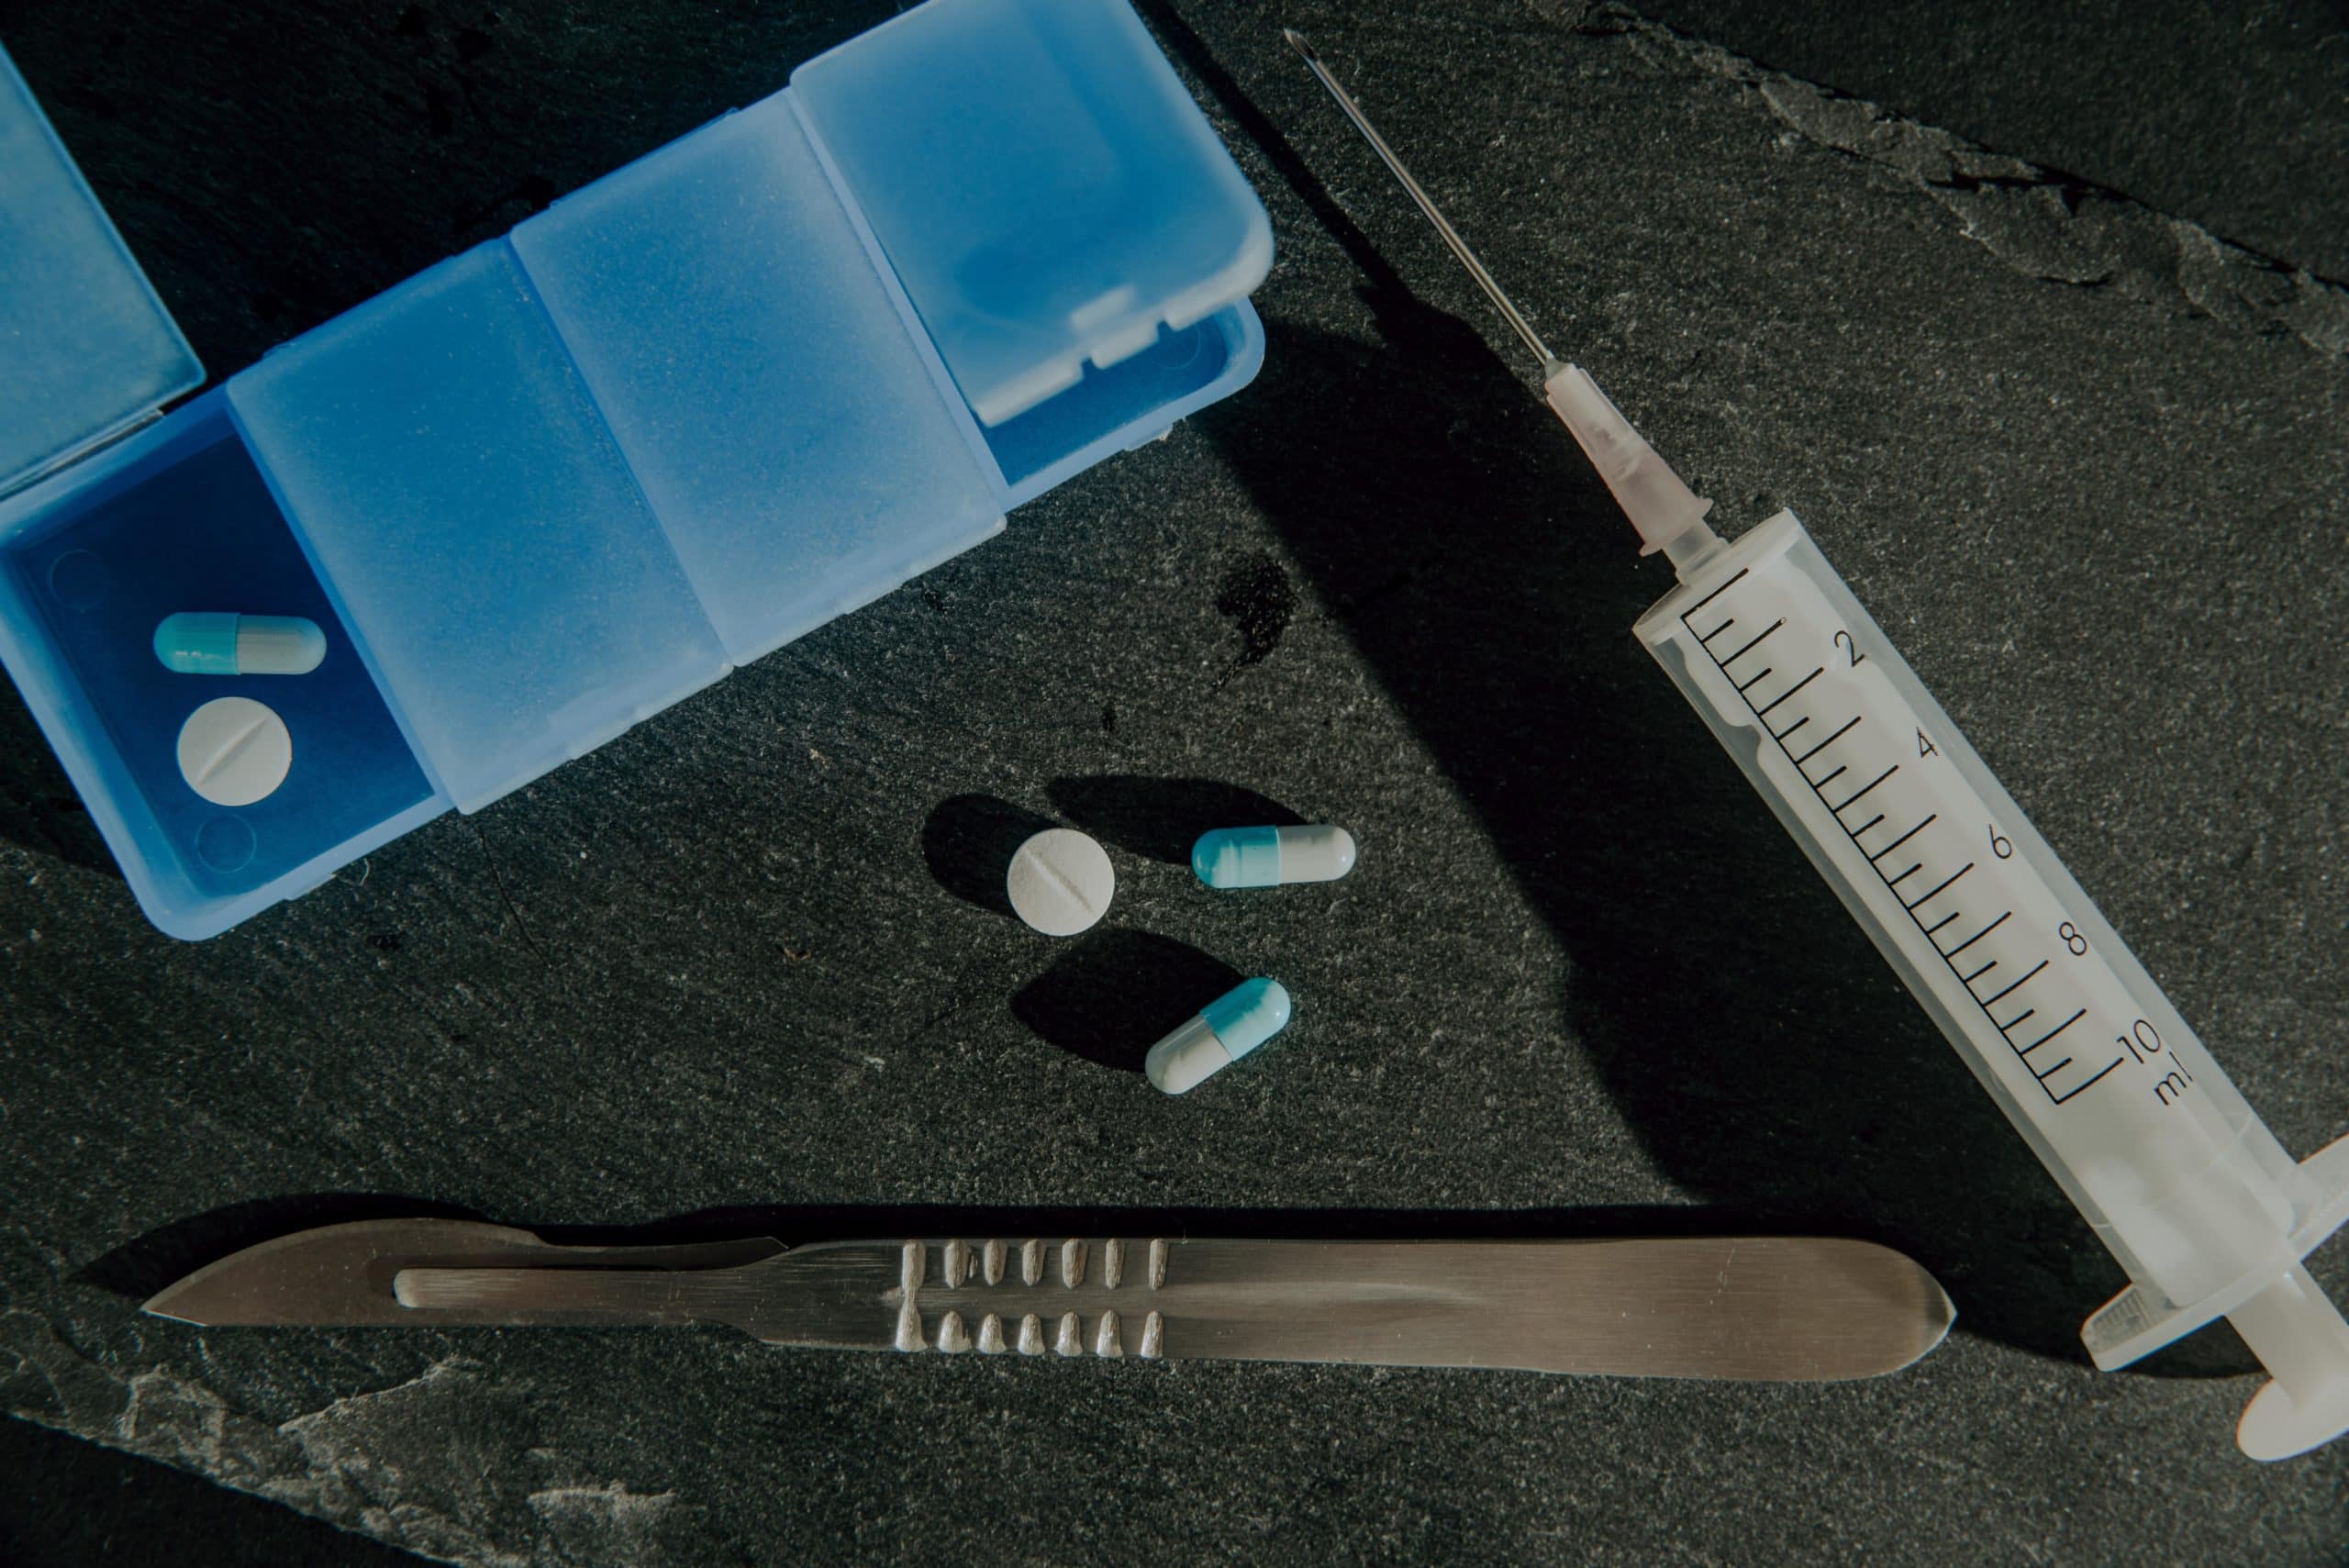 pills laying on table beside needle and scalpel